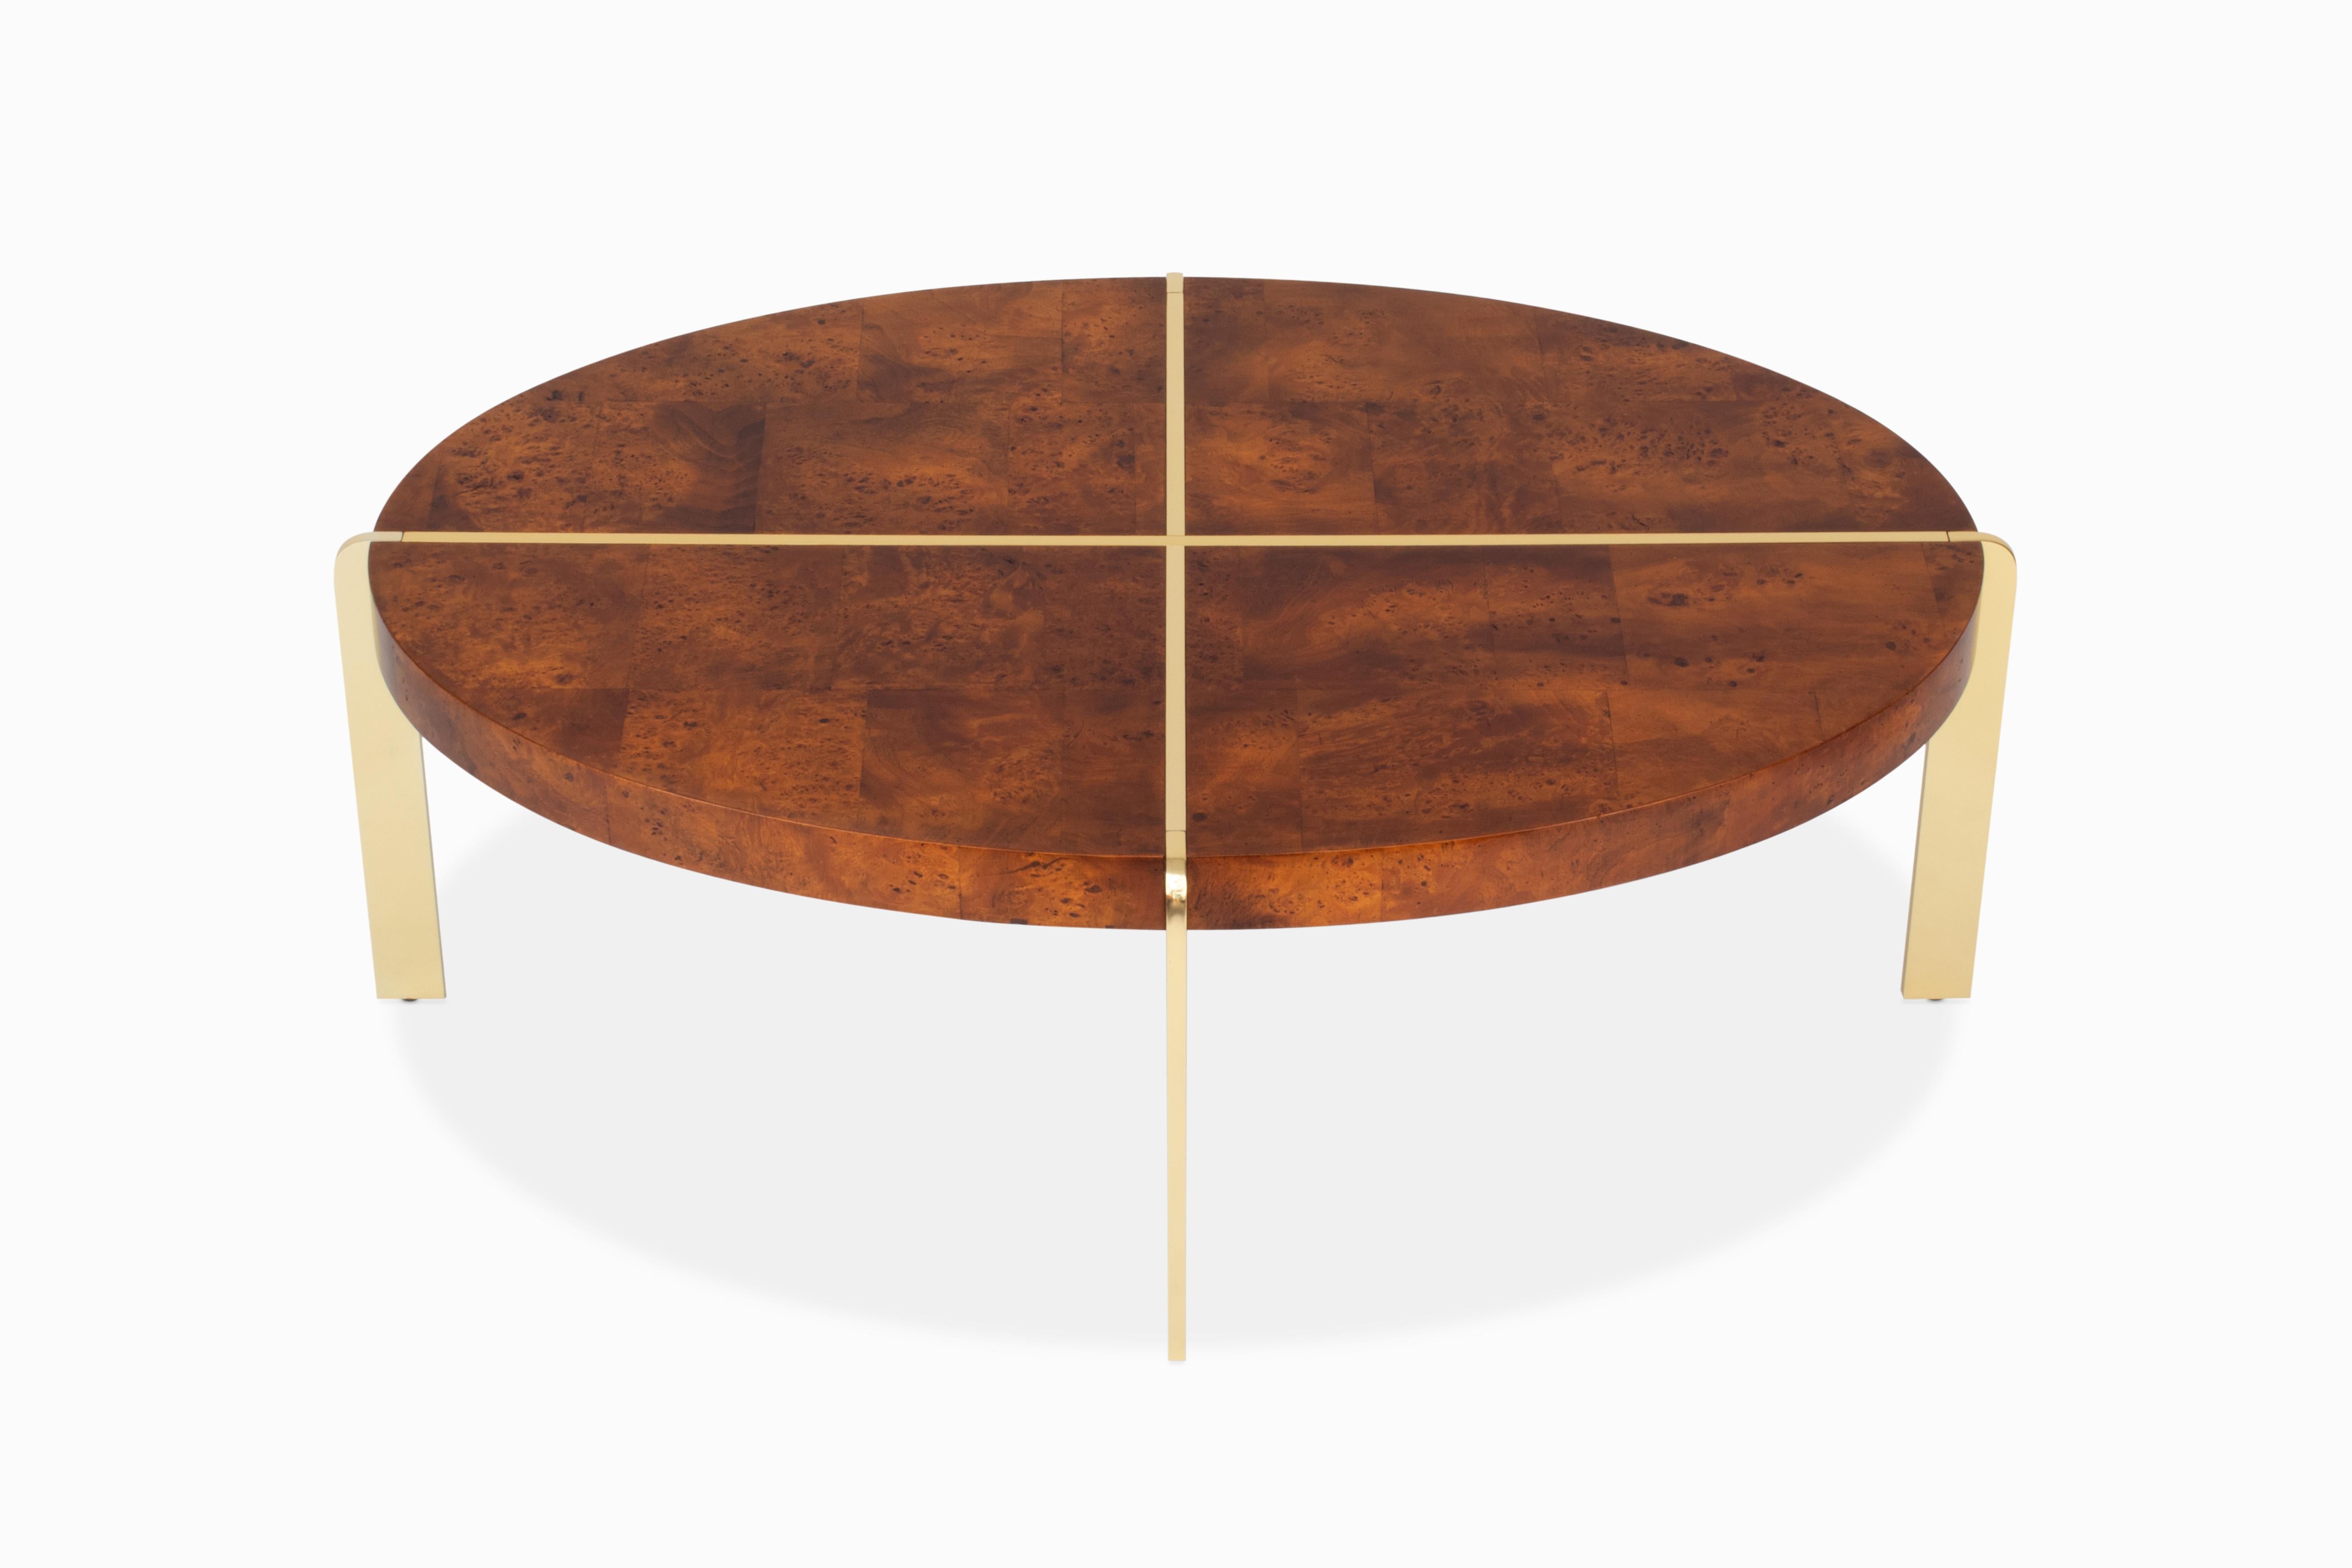 Here is a wonderful mid century oval coffee / cocktail table by Hekman in the style of Milo Baughman. It is comprised of patchwork olive burl veneer with solid brass elements. This table is a nice versatile size at 46